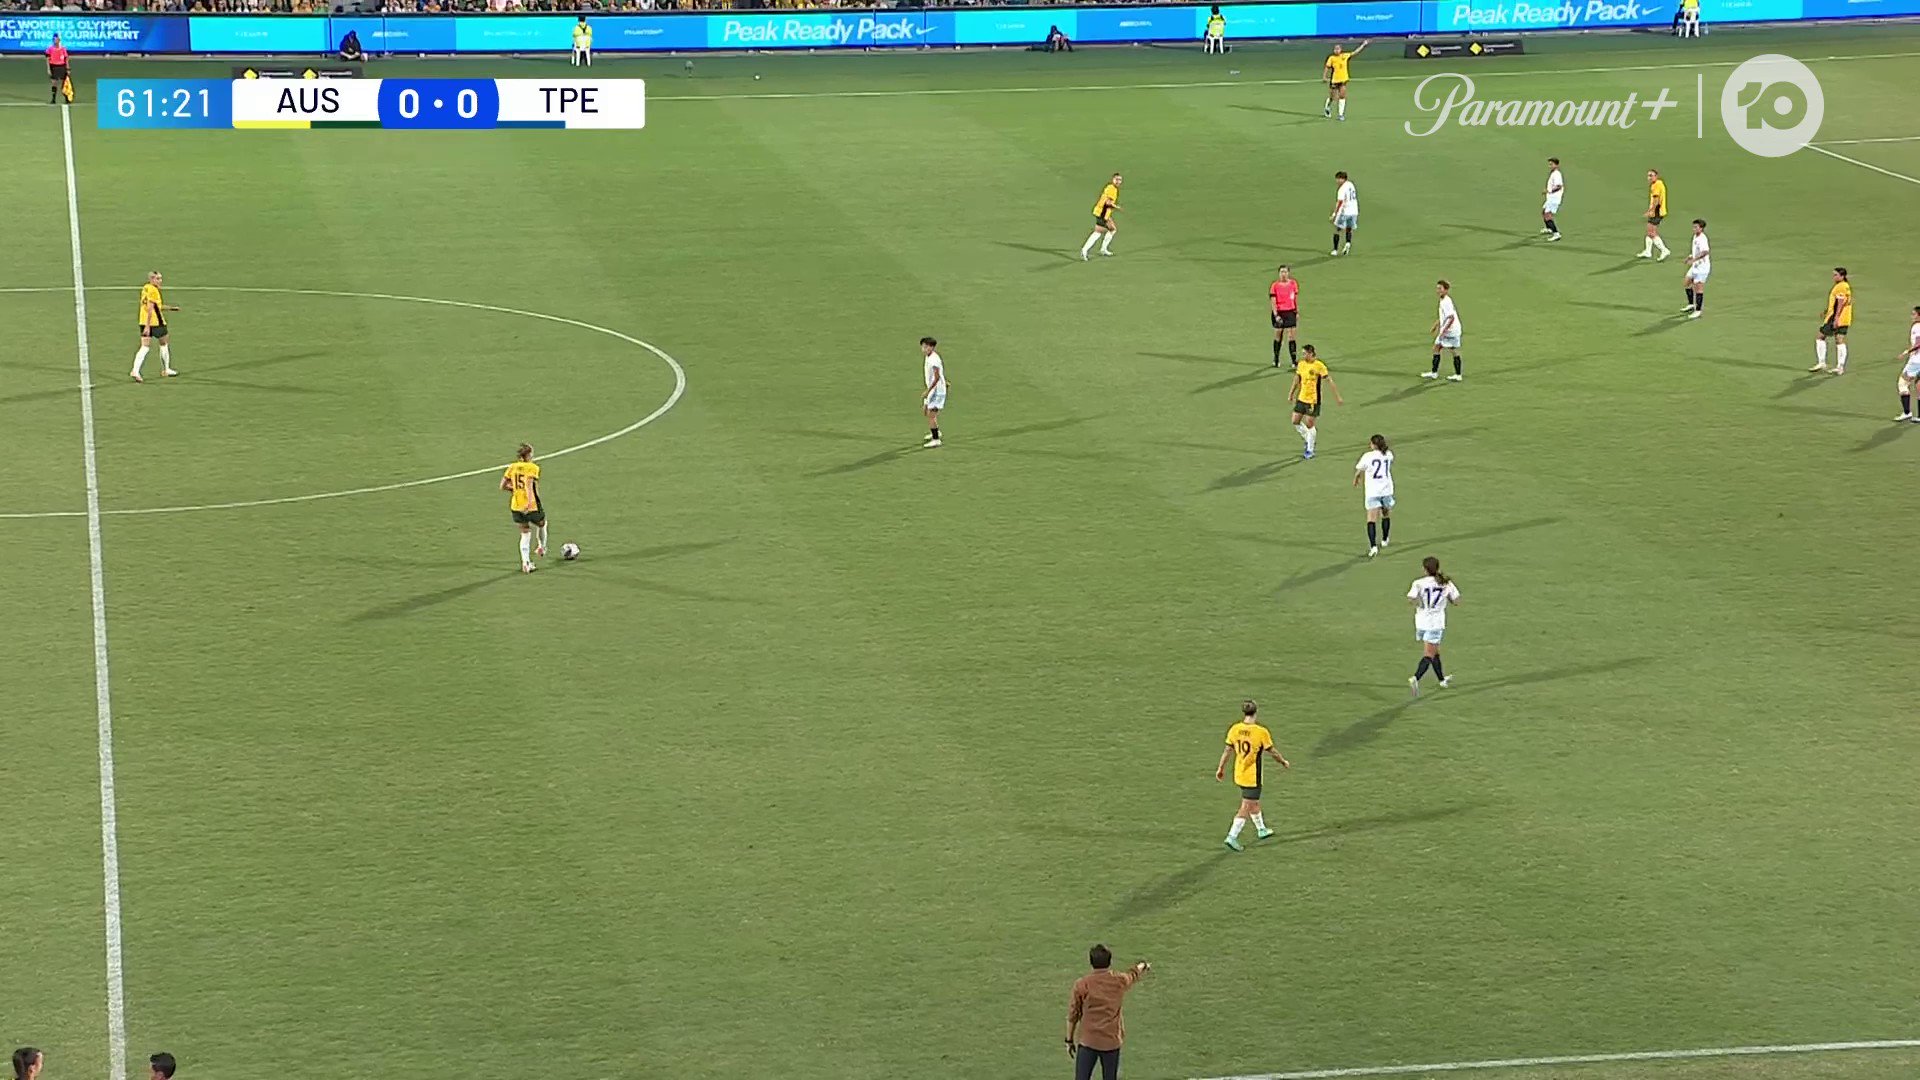 A goal worth waiting for 😉Mary gives us the lead with a banger 🔥#AUSvTPE #Matildas #WAtheDreamState